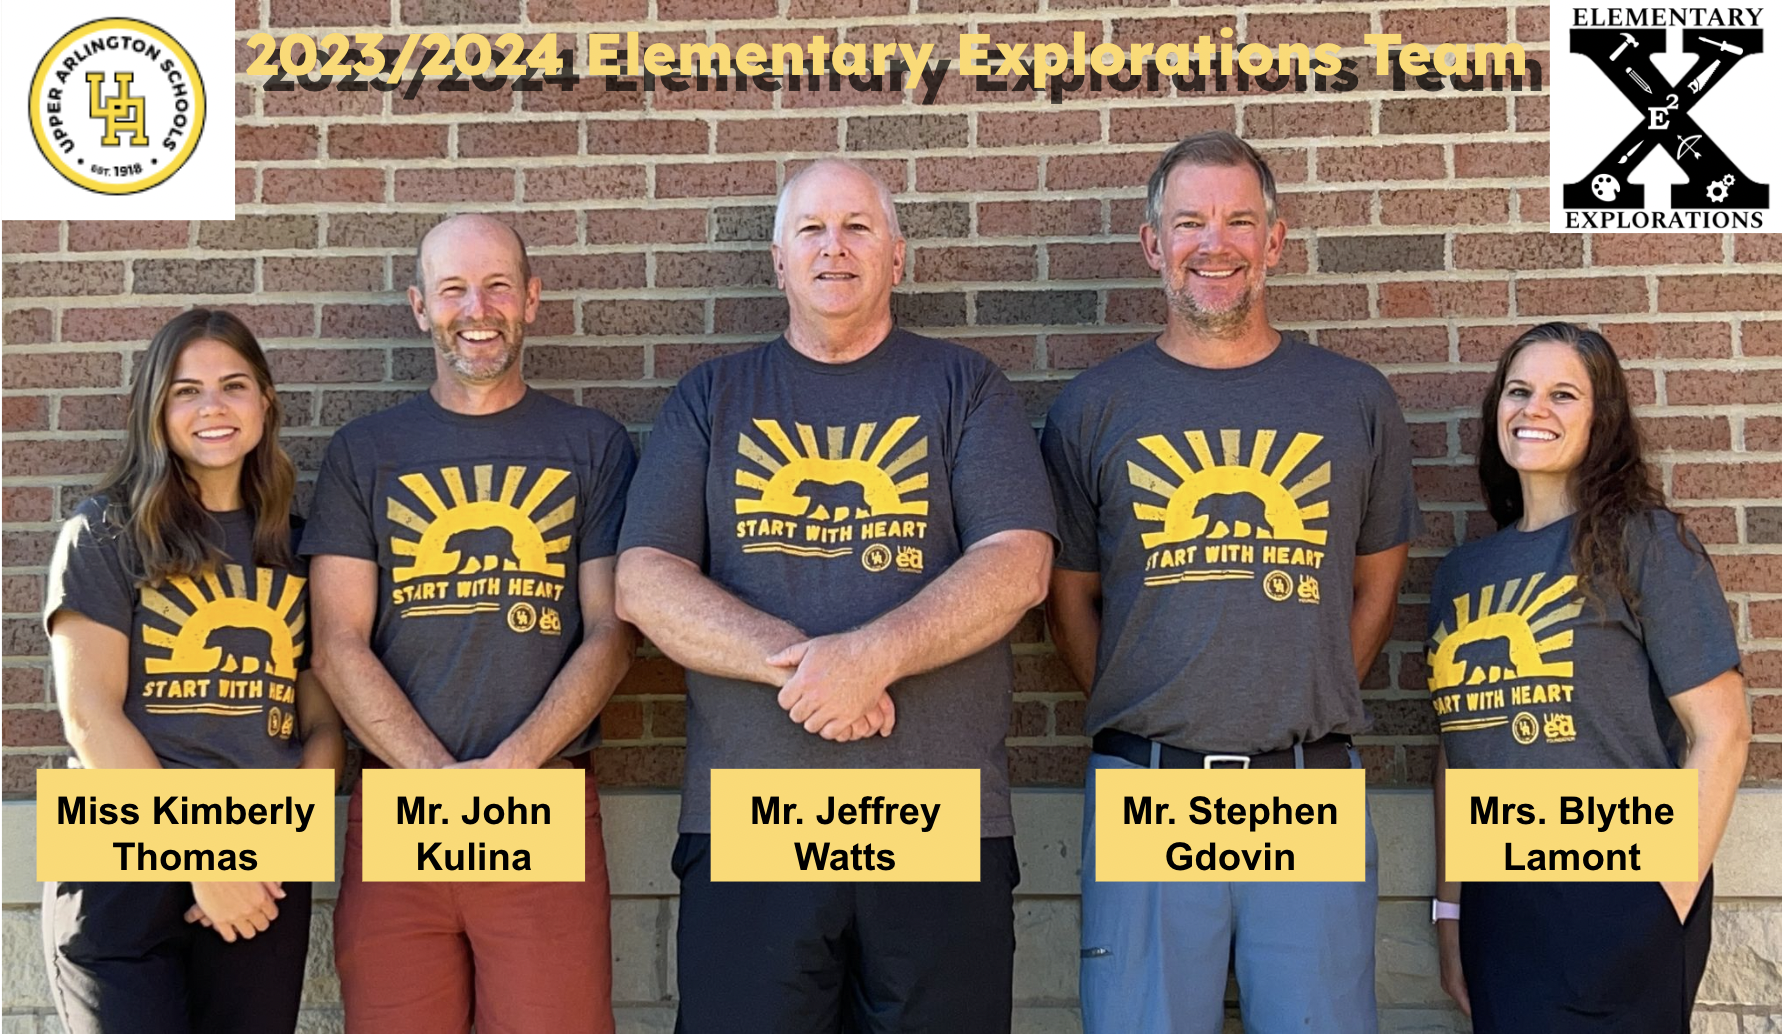 The five members of the Elementary Explorations team posing for a photo in front of a brick wall, all wearing their staff gray and gold Start With Heart t-shirts